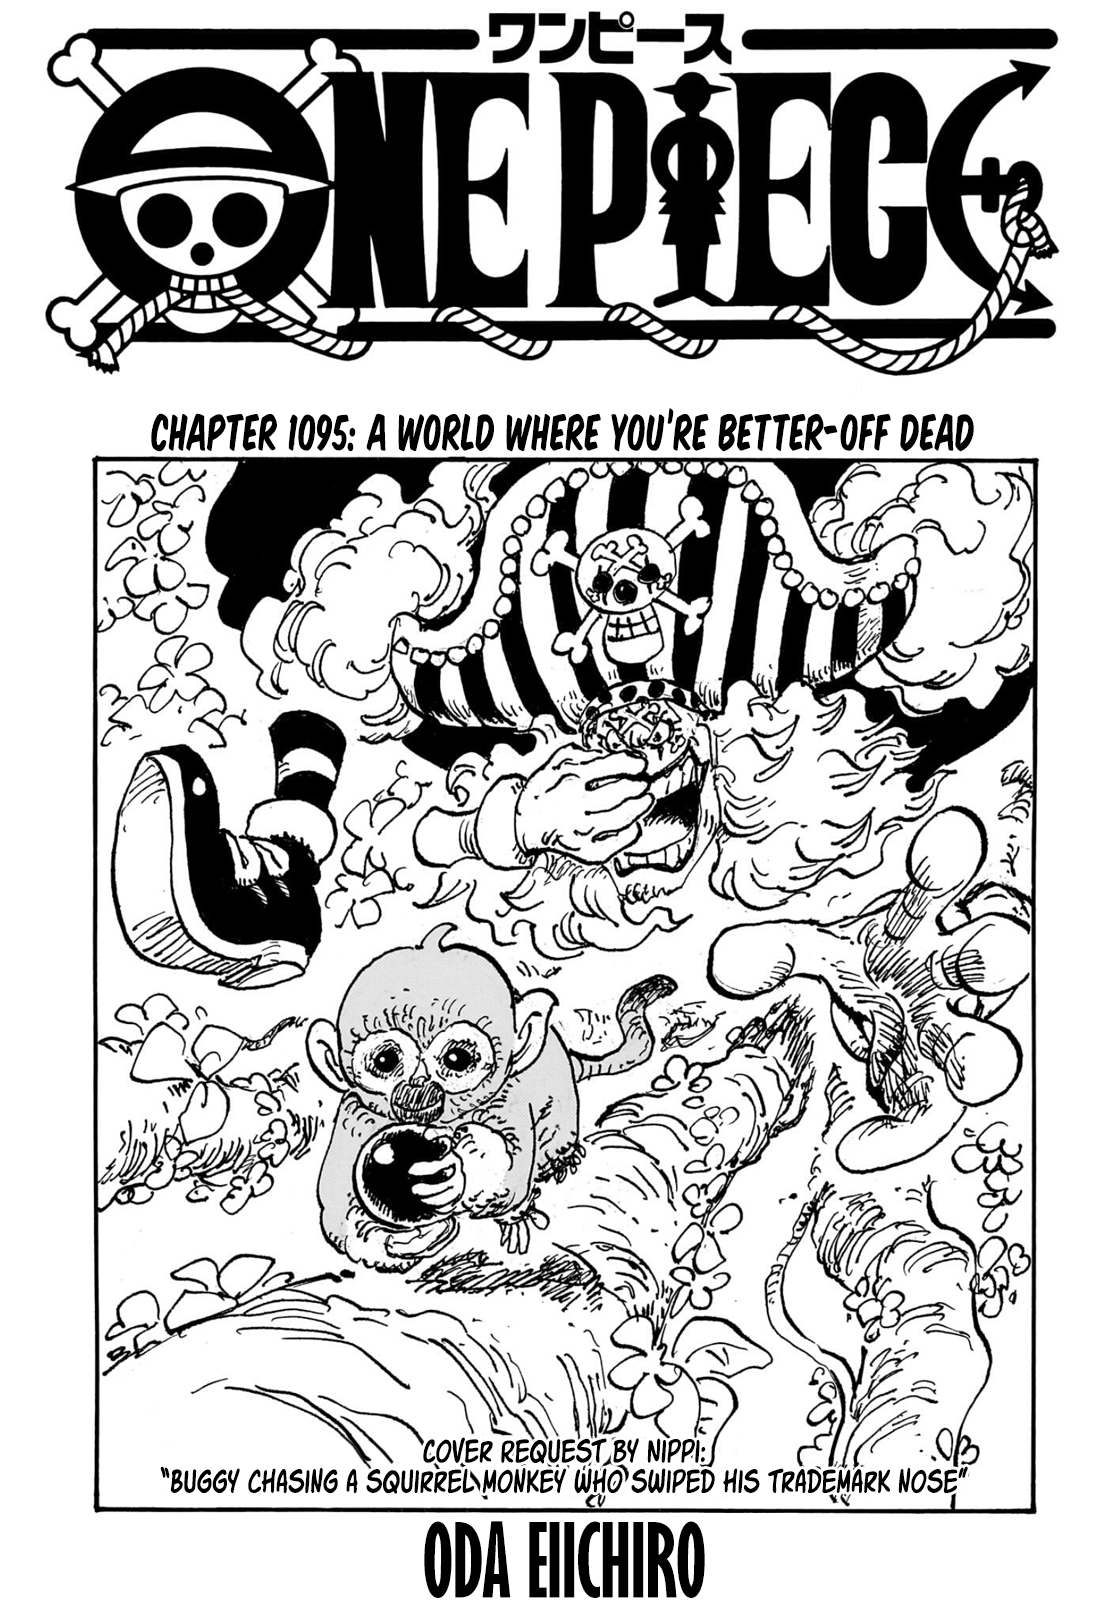 IT'S OVER, HE'S HERE! - One Piece Chapter 1065 (Predictions) 